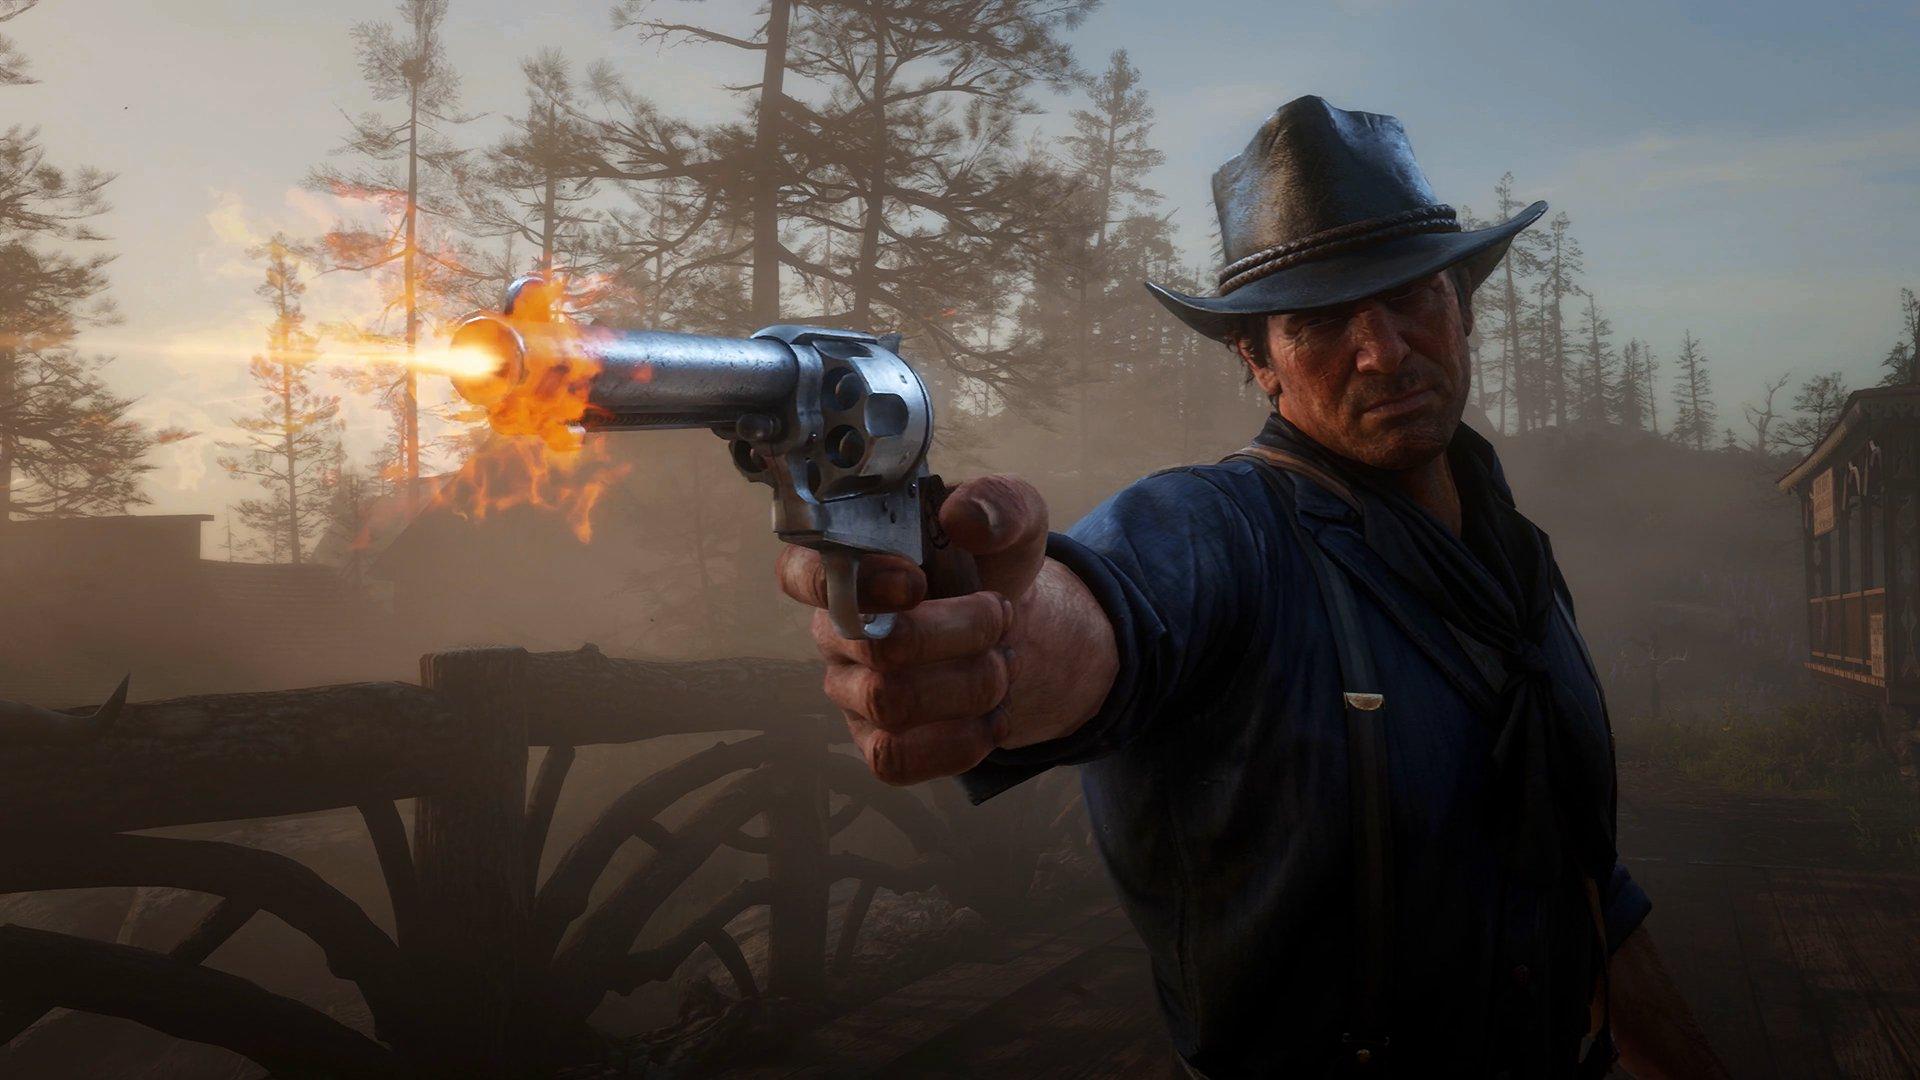 The Most Wallpaper Worthy Screenshots From The Red Dead Redemption 2